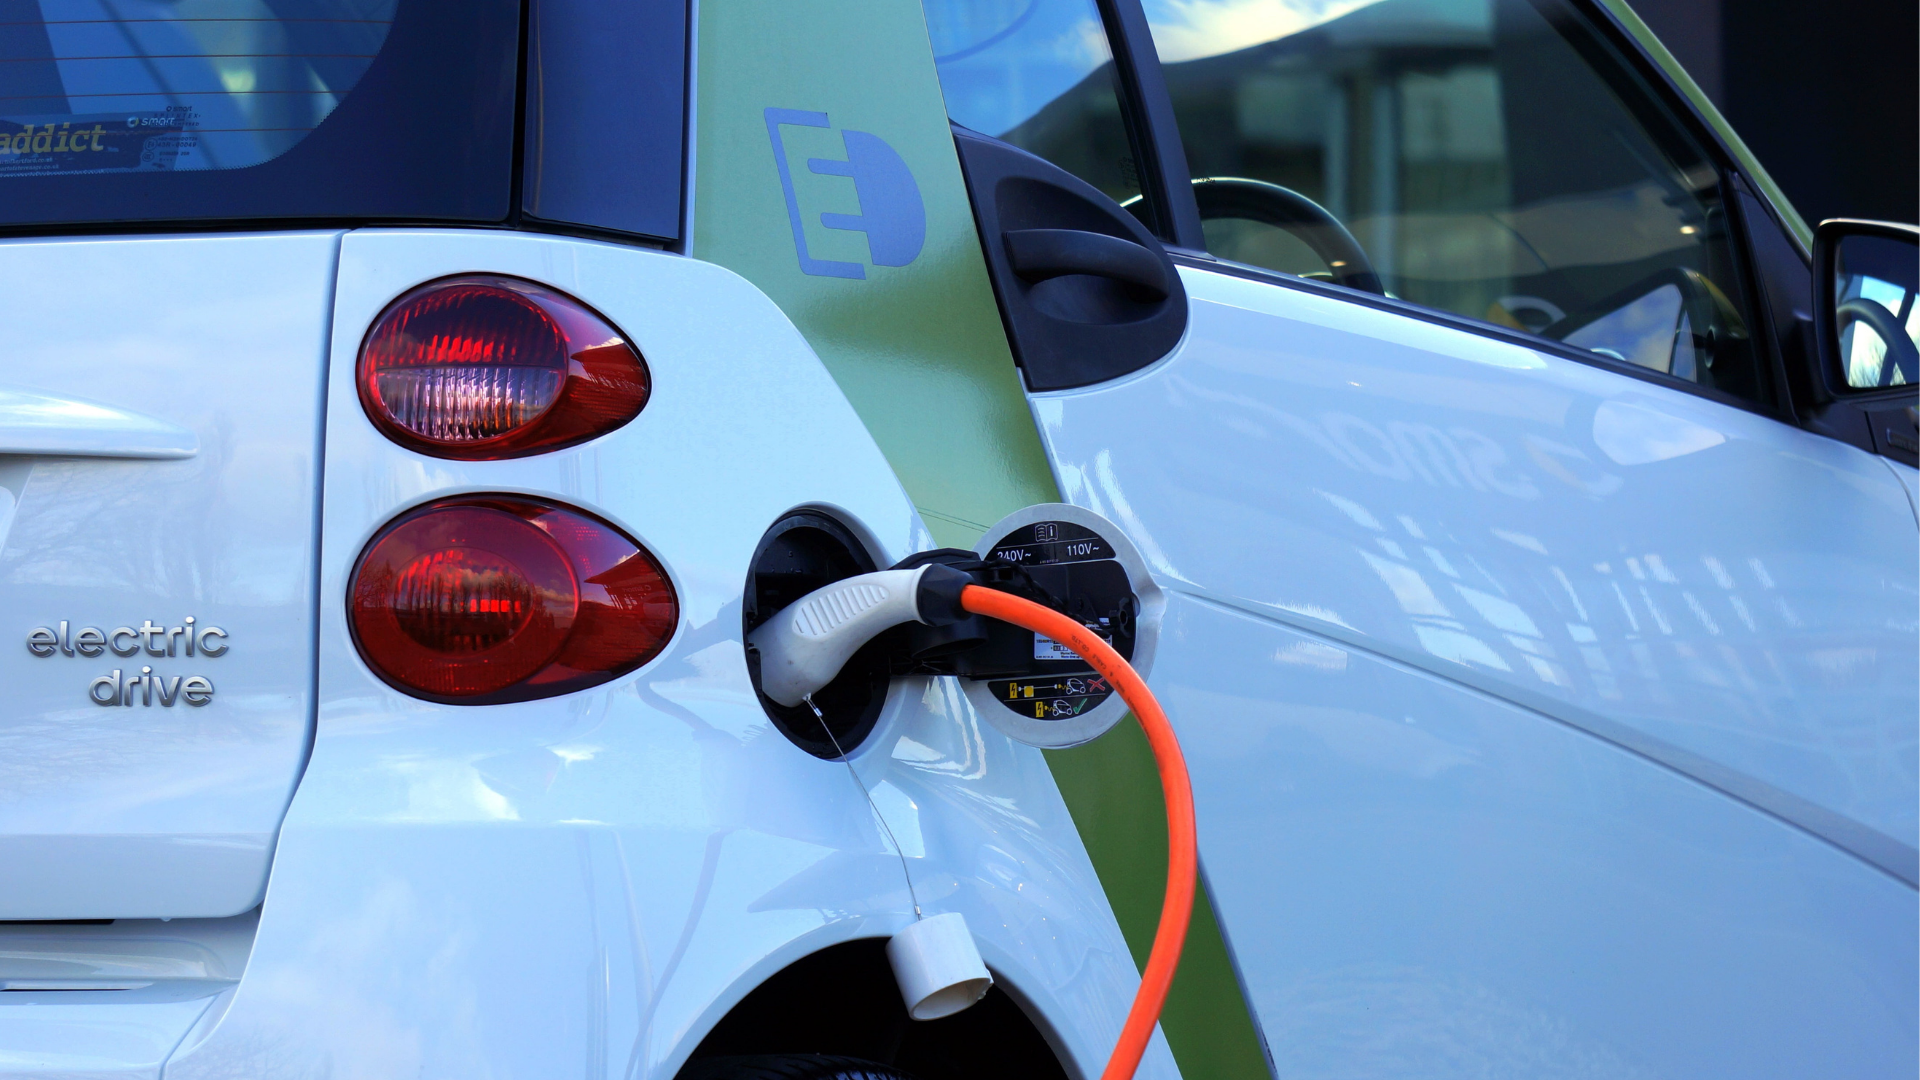 Electric vehicles could help tackle the climate crisis. Image credit: Piqsels